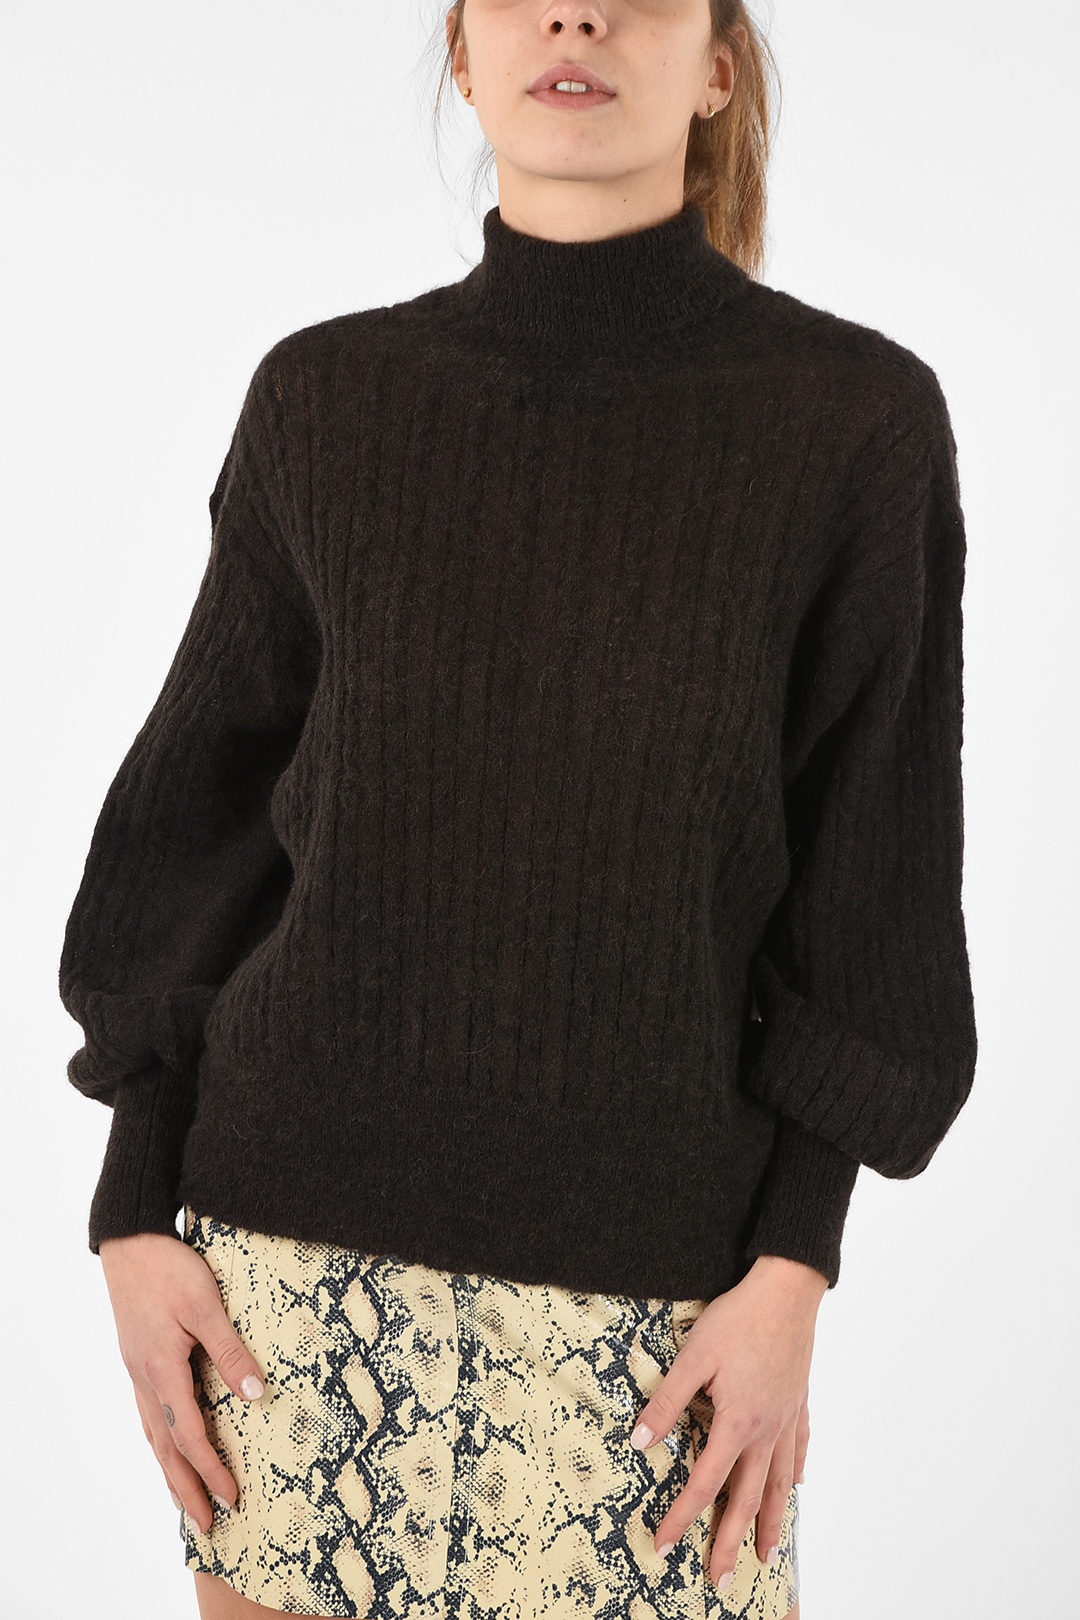 Maison Flaneur turtle neck cable knit Sweater women - Glamood Outlet